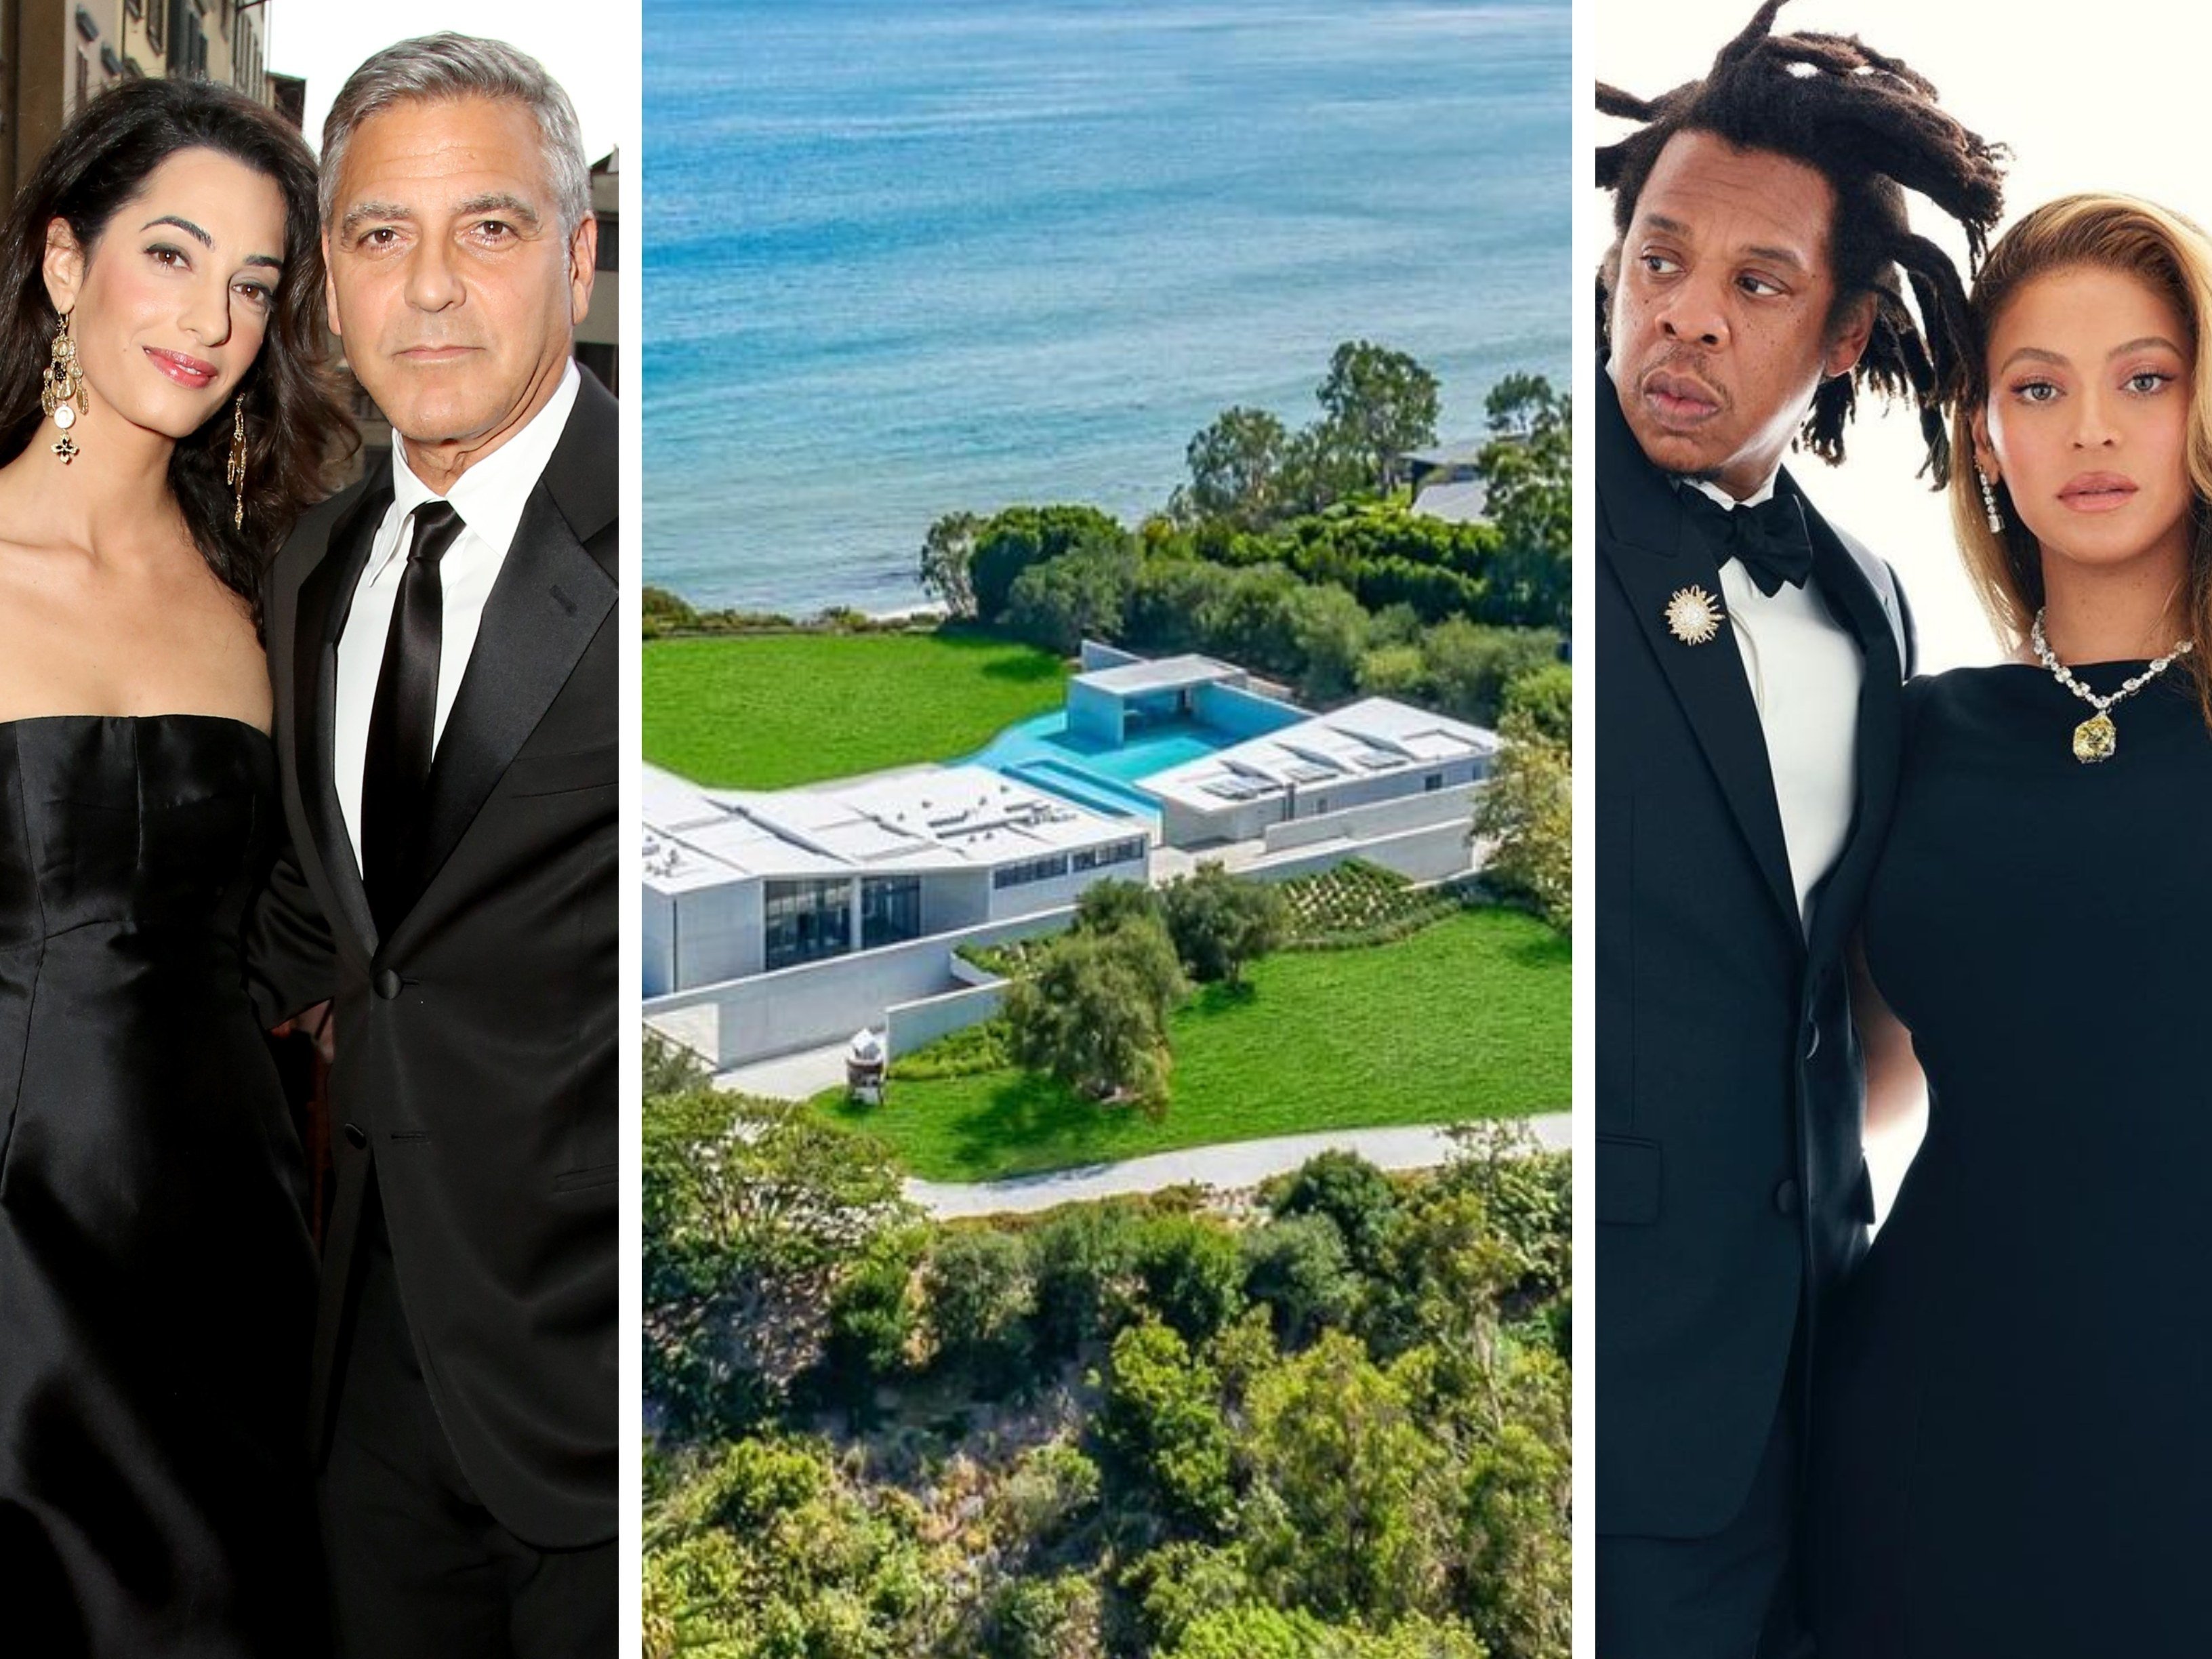 Celebrity couples Amal and George Clooney, and Beyoncé and Jay-Z, possess some of the most expensive homes in the world. Photos: Getty Images, @mrbarcelo, @beyonce/Instagram